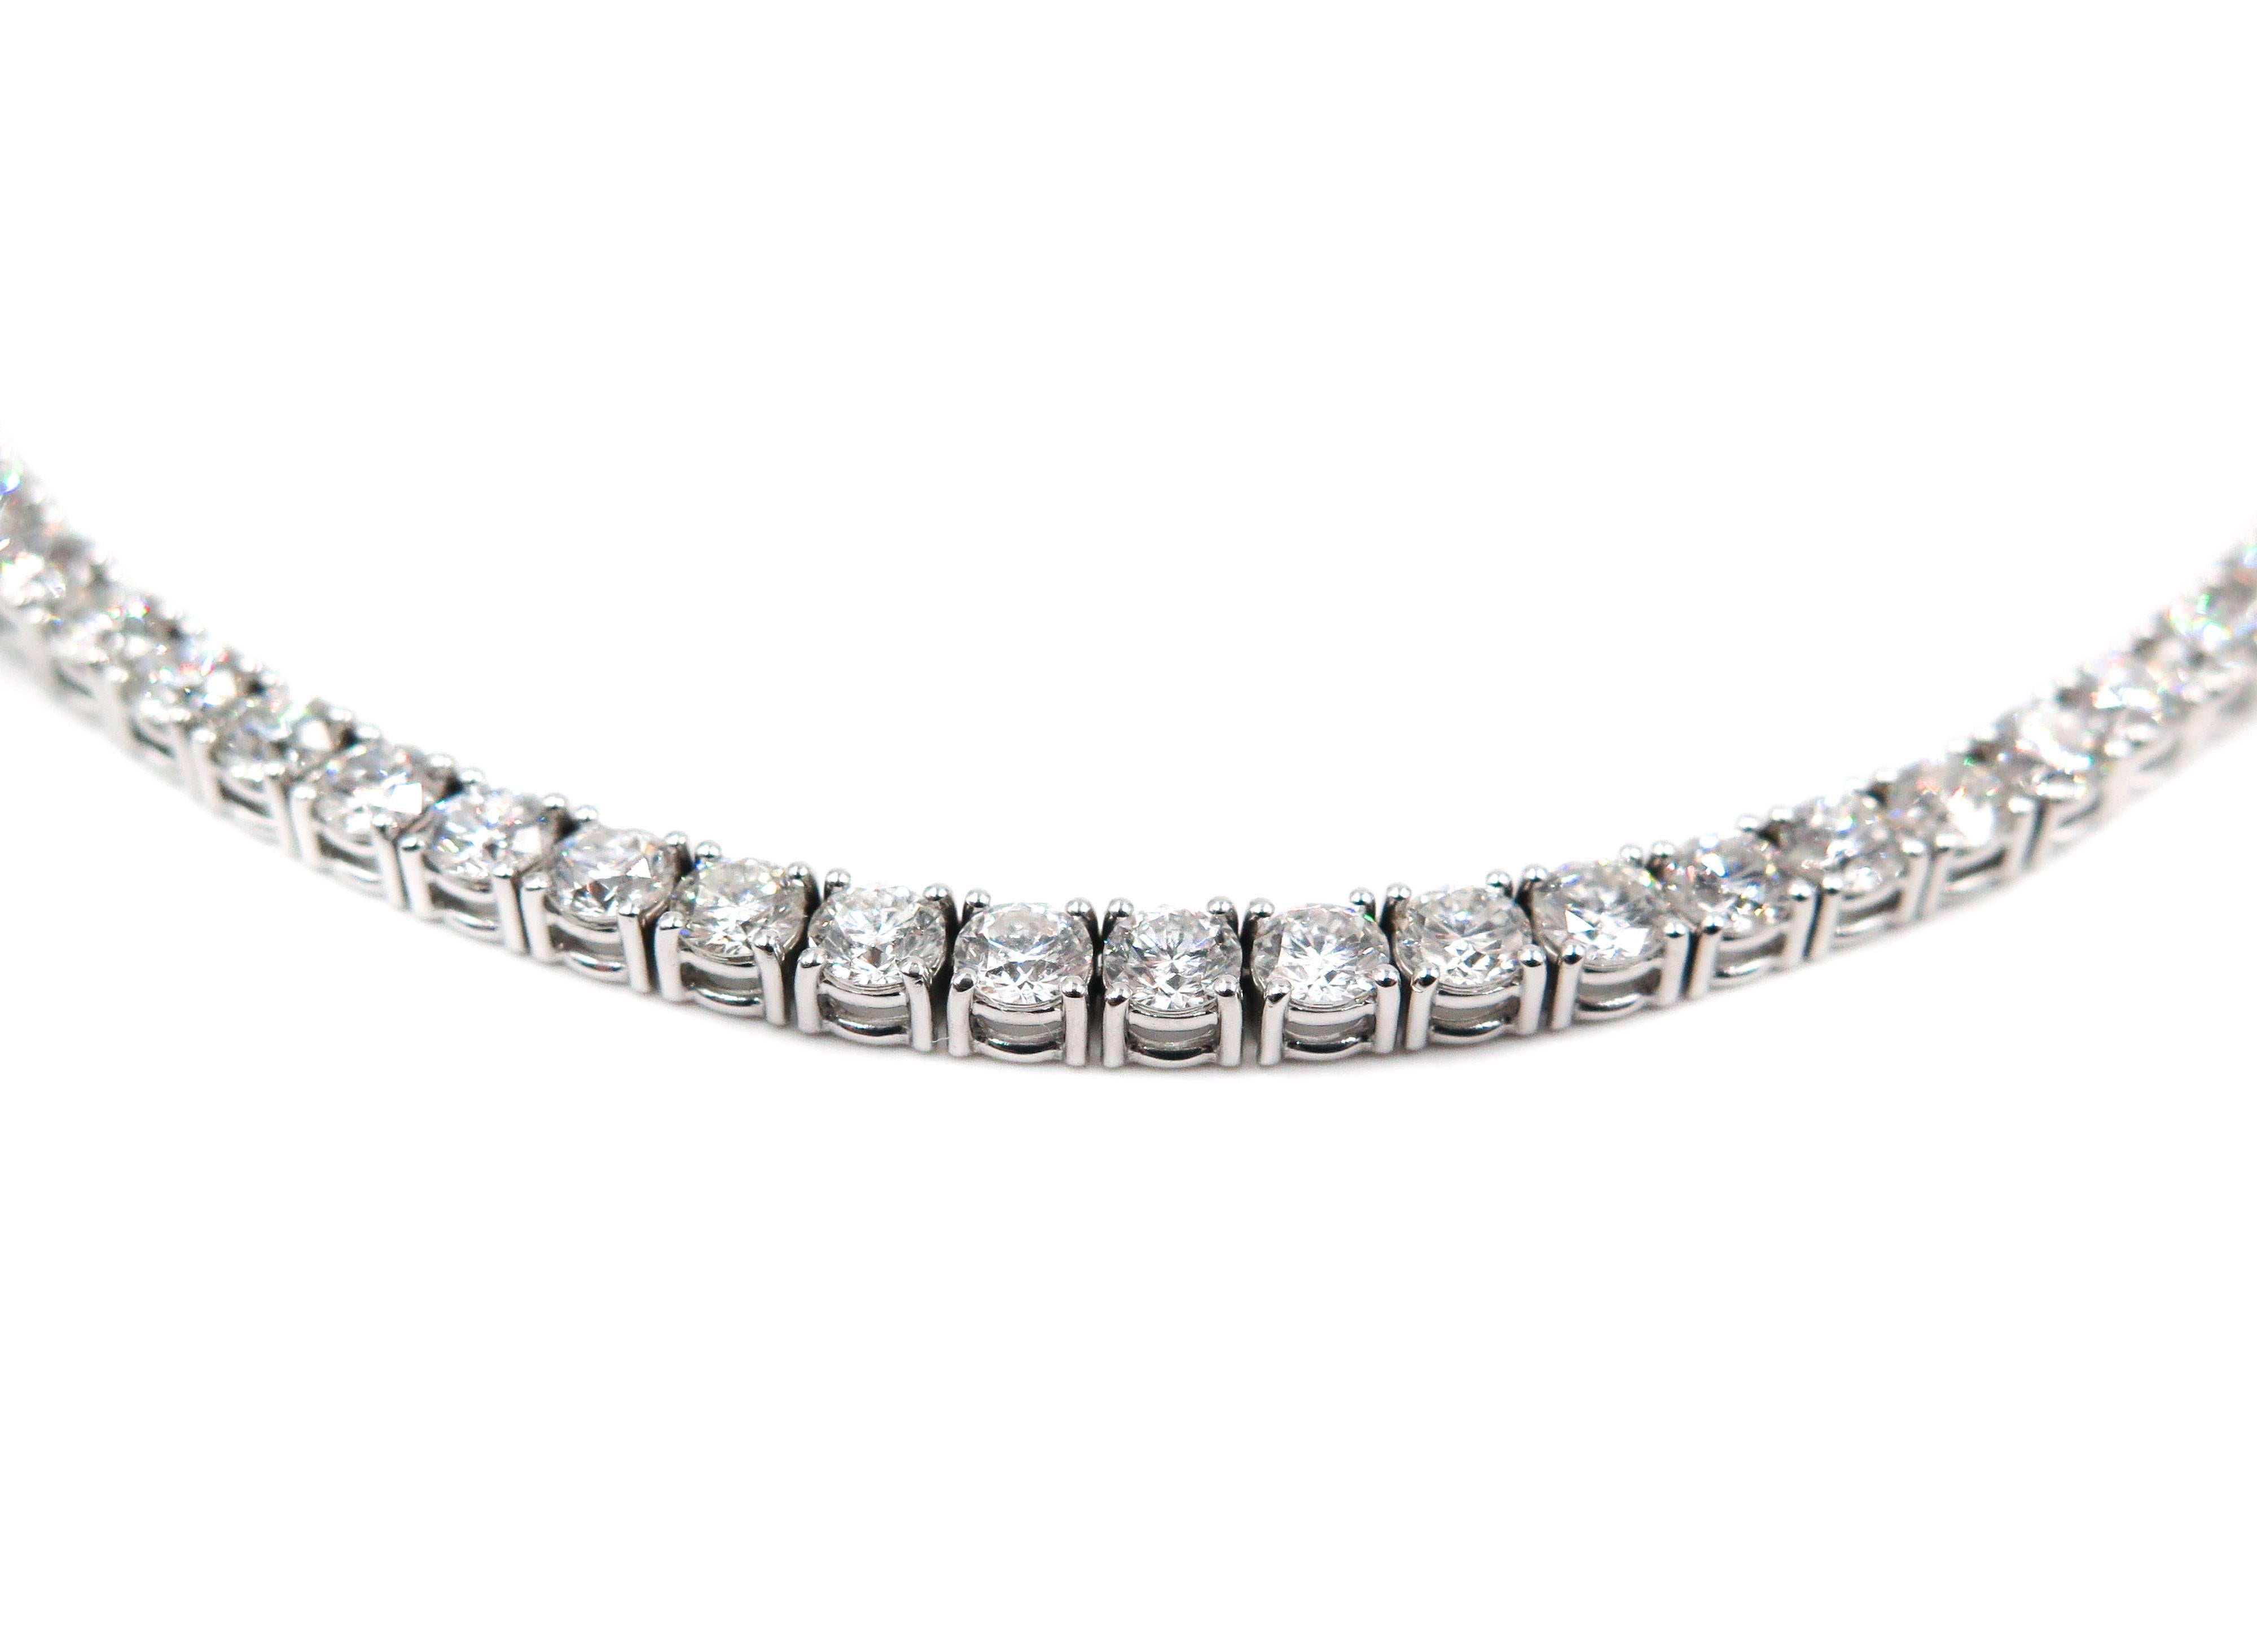 Italian Master jewelers pride themselves of excellent craftsmanship and there's not doubt of their reputation. You can certainly enjoy it in this gorgeous Diamond Line Necklace, set in 18k white gold making this necklace an exquisite piece of